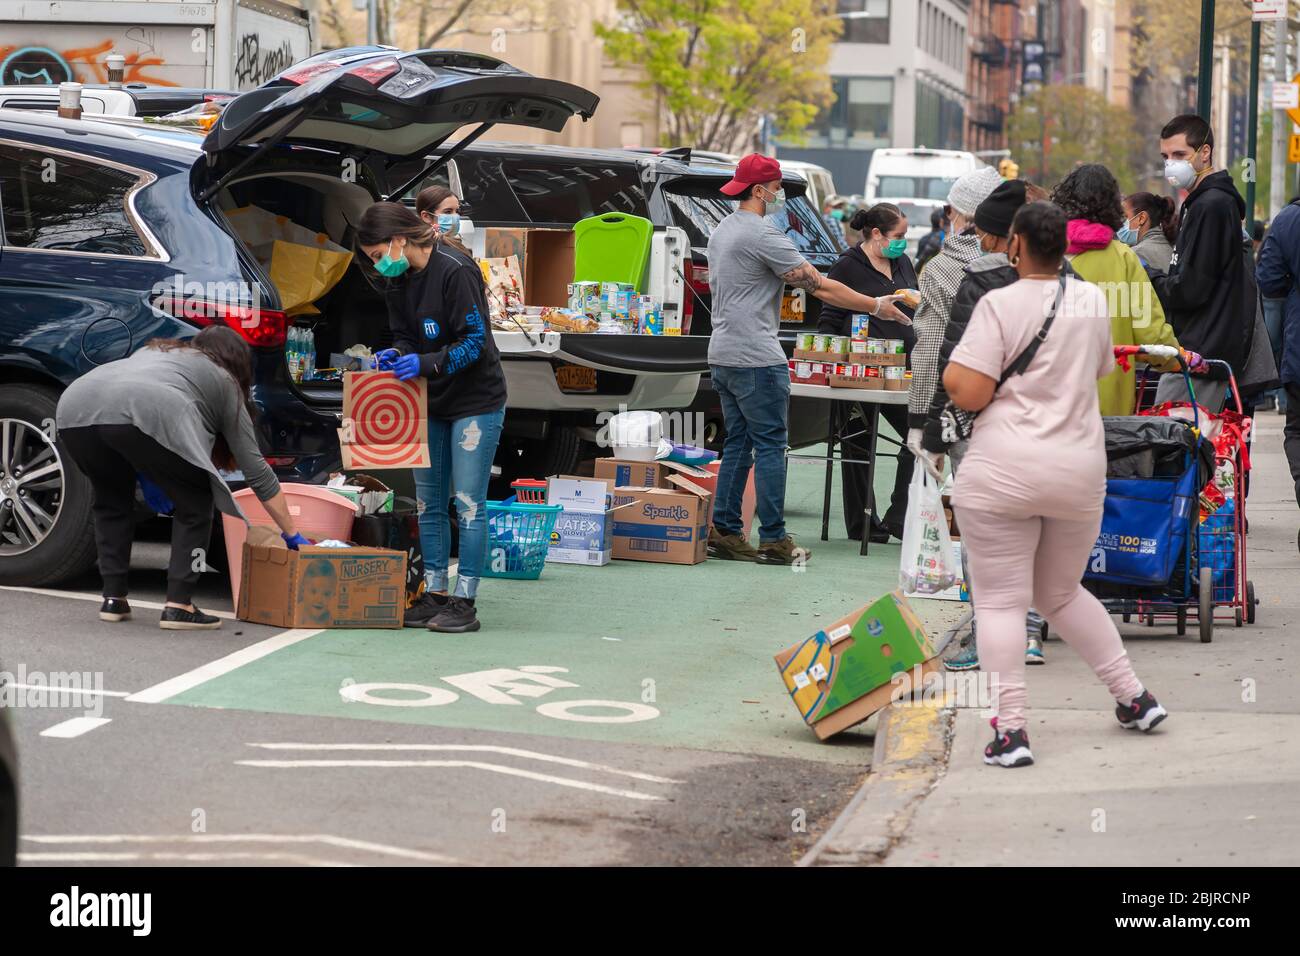 Evangelical volunteers in Chelsea in New York distribute food on Saturday, April 25, 2020. With 26 million people applying for unemployment food pantries have become a lifeline for many.  (© Richard B. Levine) Stock Photo